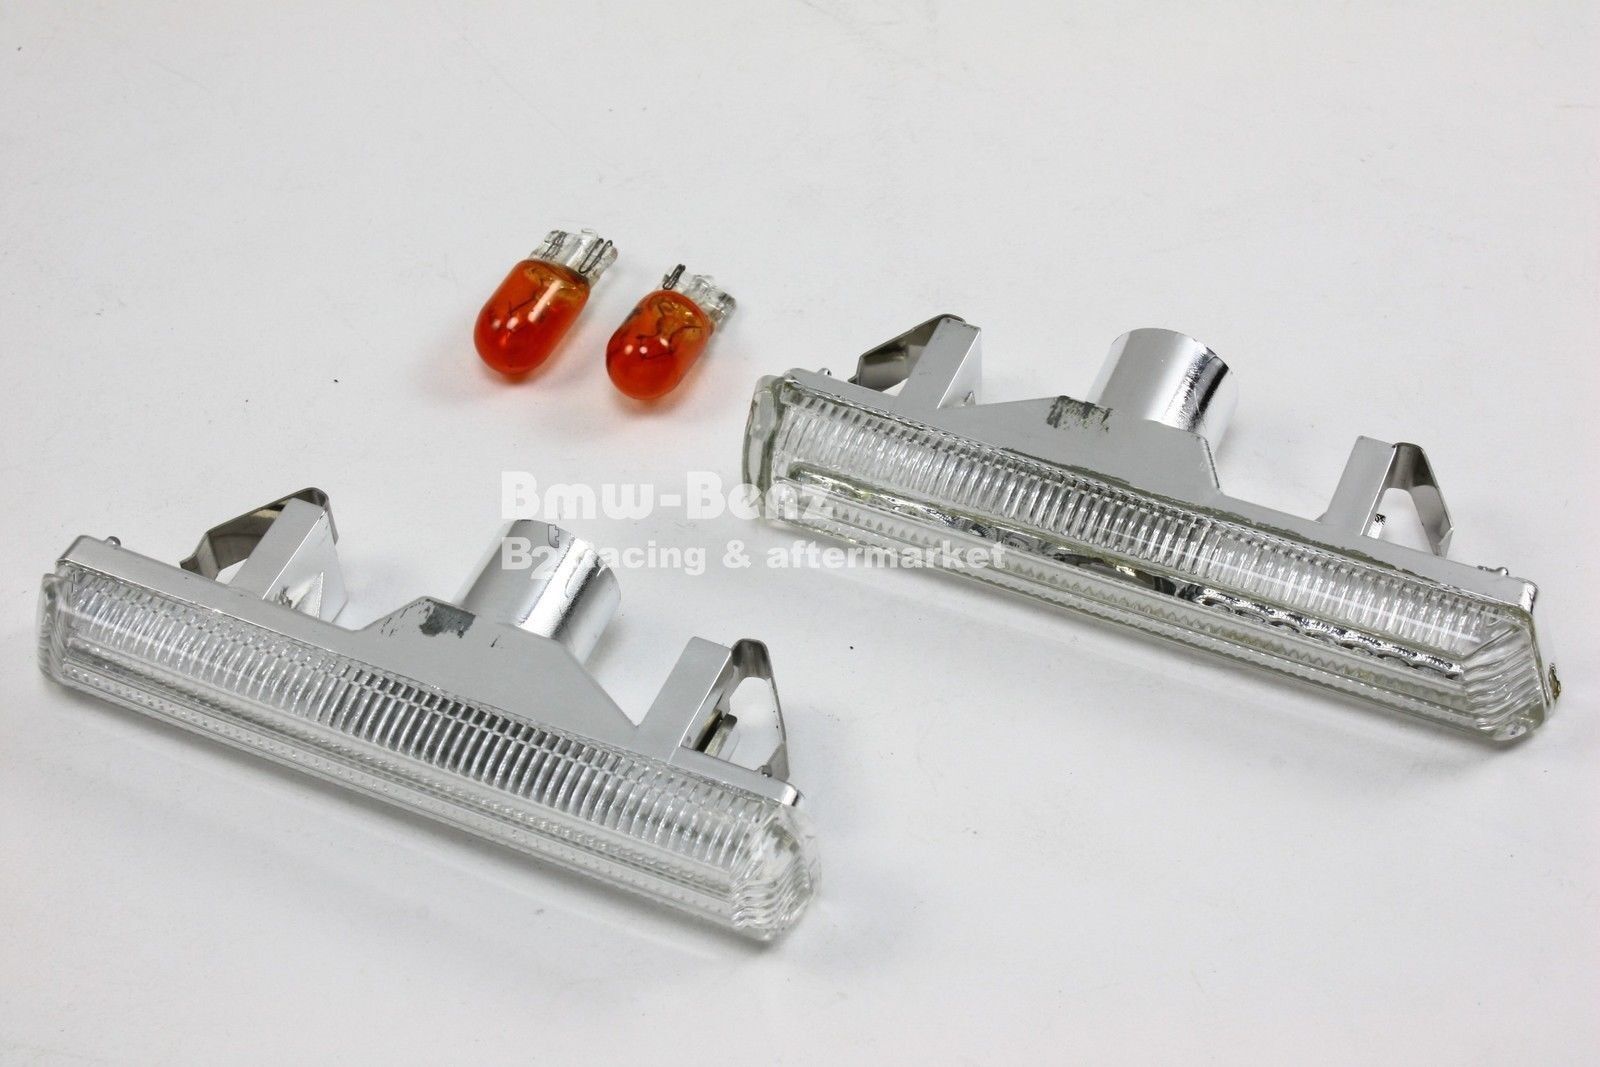 Bulb SIDE MARKERS INDICATORS LIGHTS for 01-06 BMW E46 M3 & 1995-2001 E38 - Clear